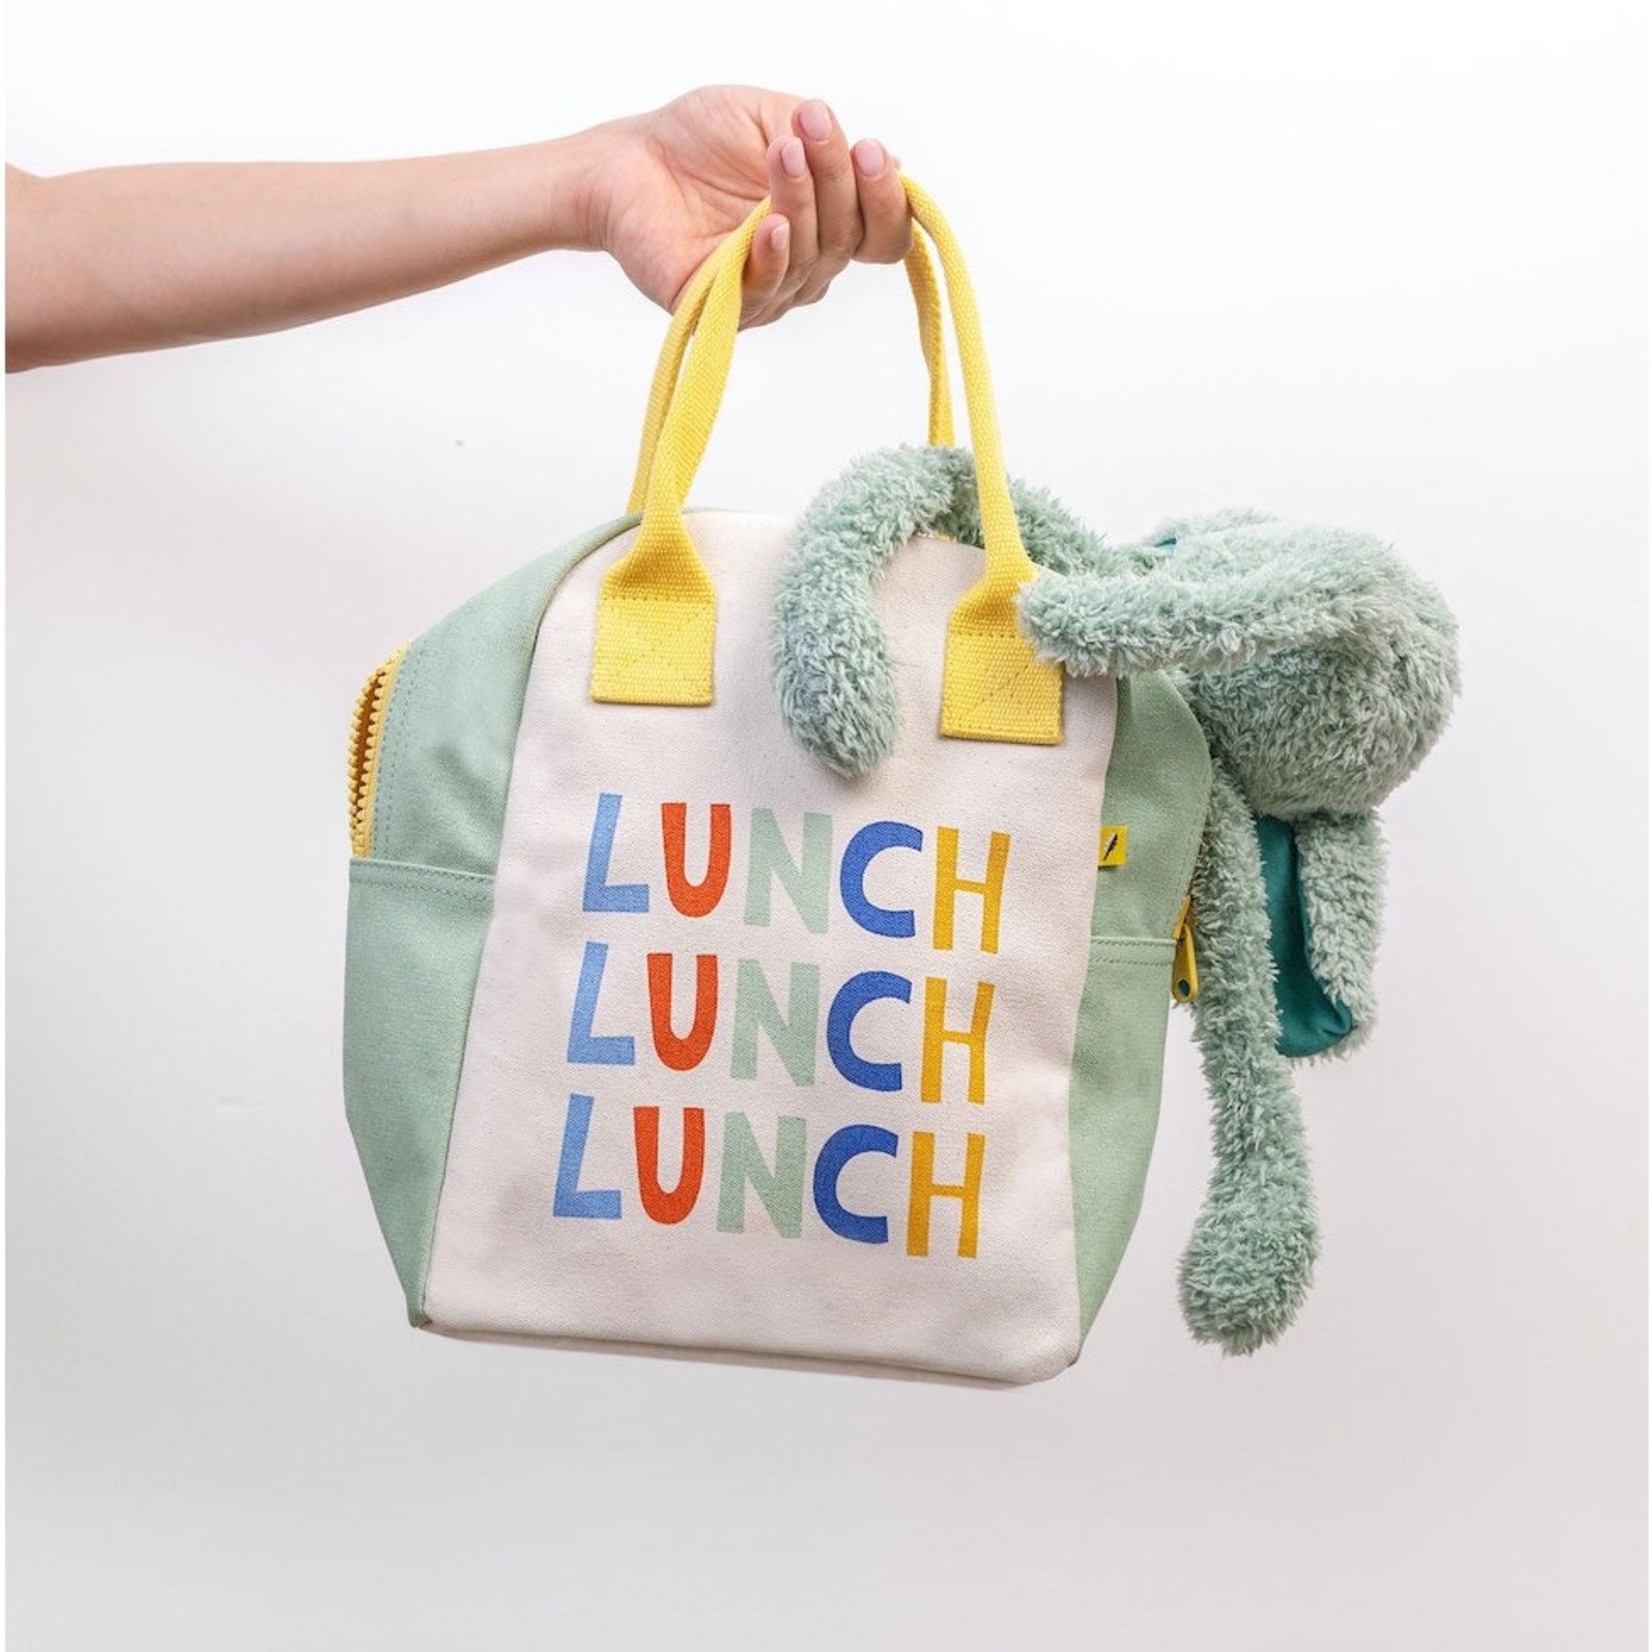 fluf lunch lunch lunch tote